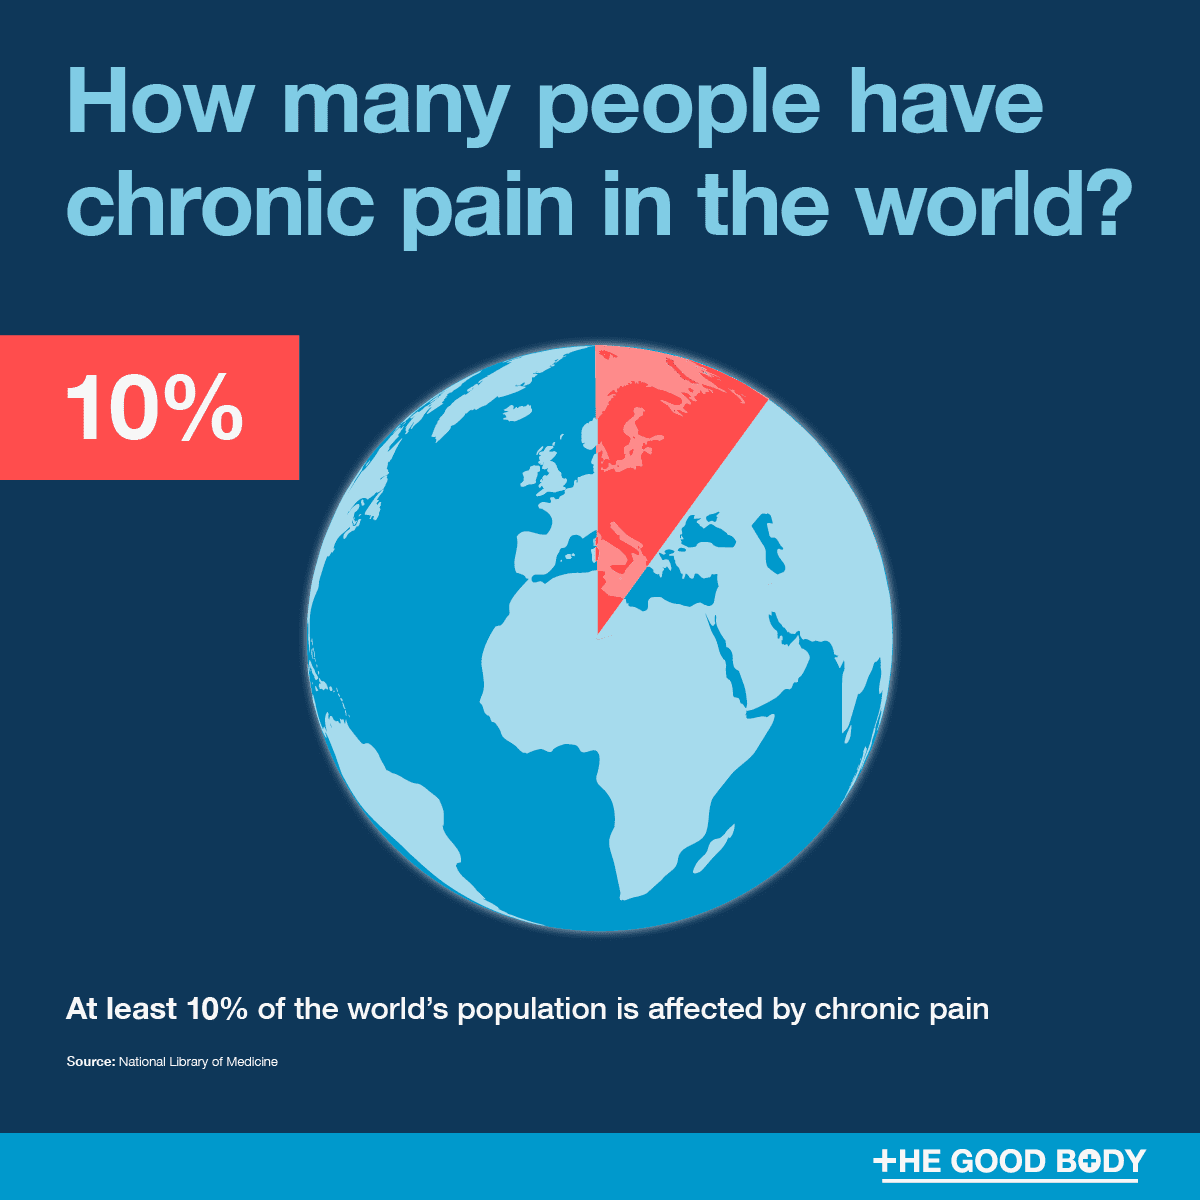 At least 10% of the world’s population is affected by chronic pain